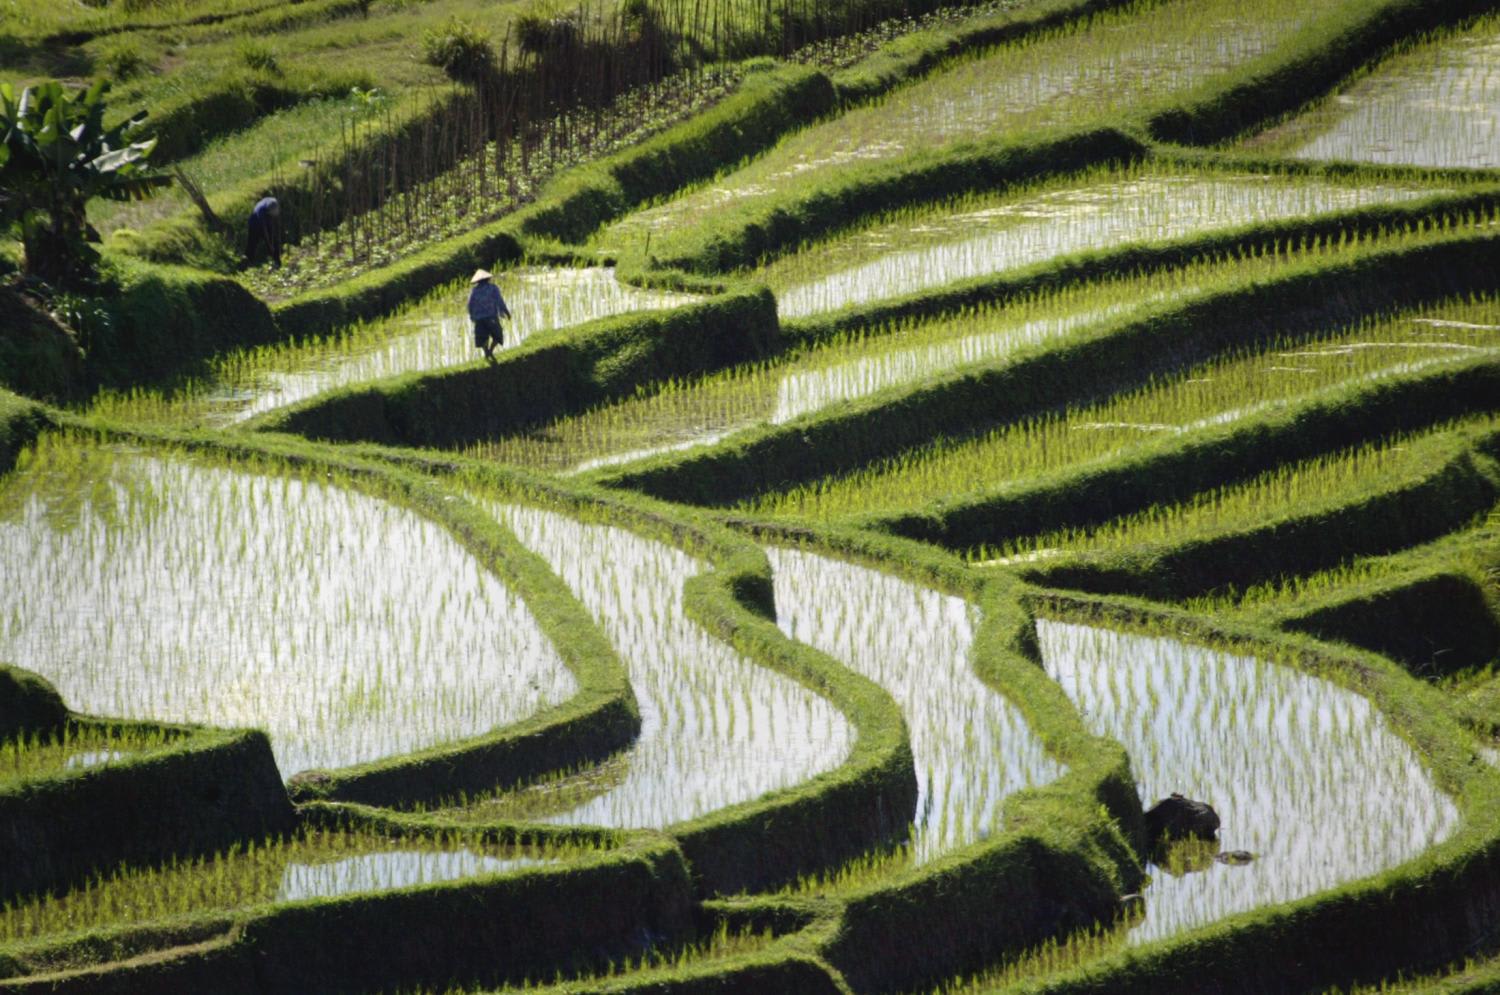 Terraced paddies are seen near Jatiluwih in central Bali, Indonesia. Singapore's Transport Minister S Iswaran said that Indonesia plans to launch a trial to allow vaccinated travellers to enter Bali from mid-March. 